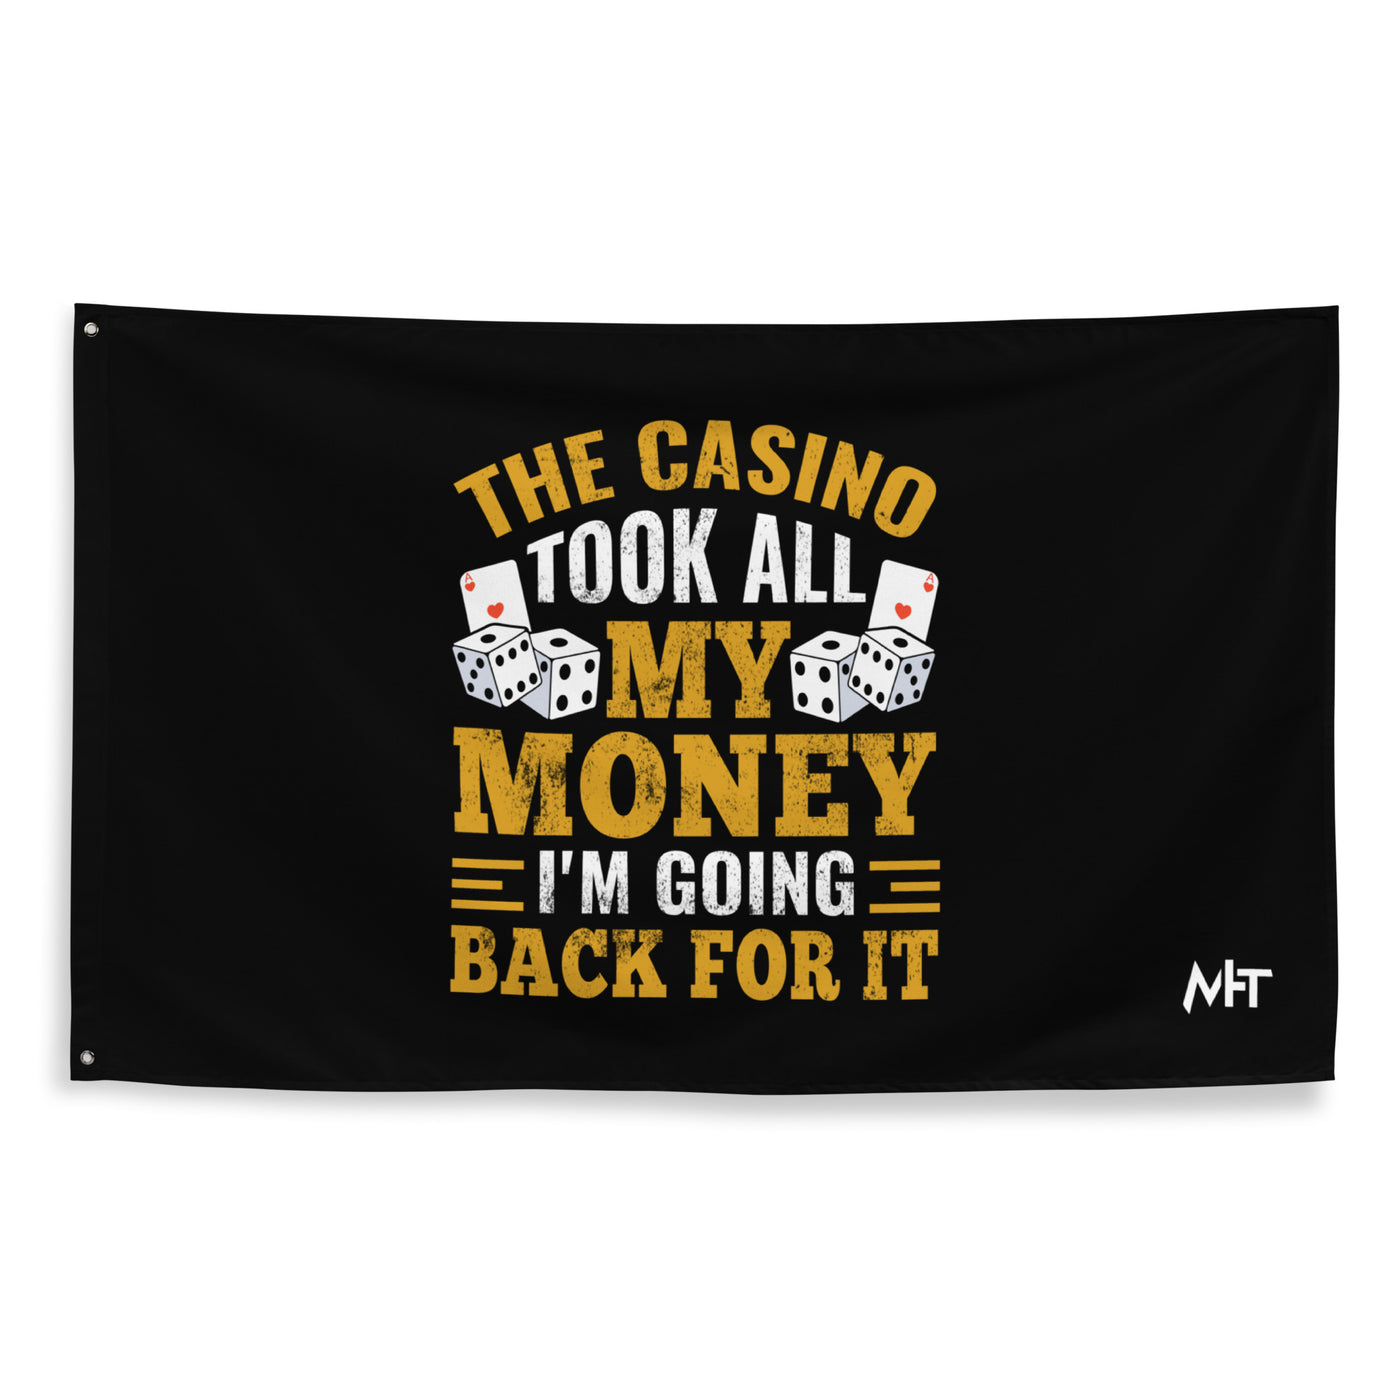 The Casino Took all my money, I am Going back for it - Flag